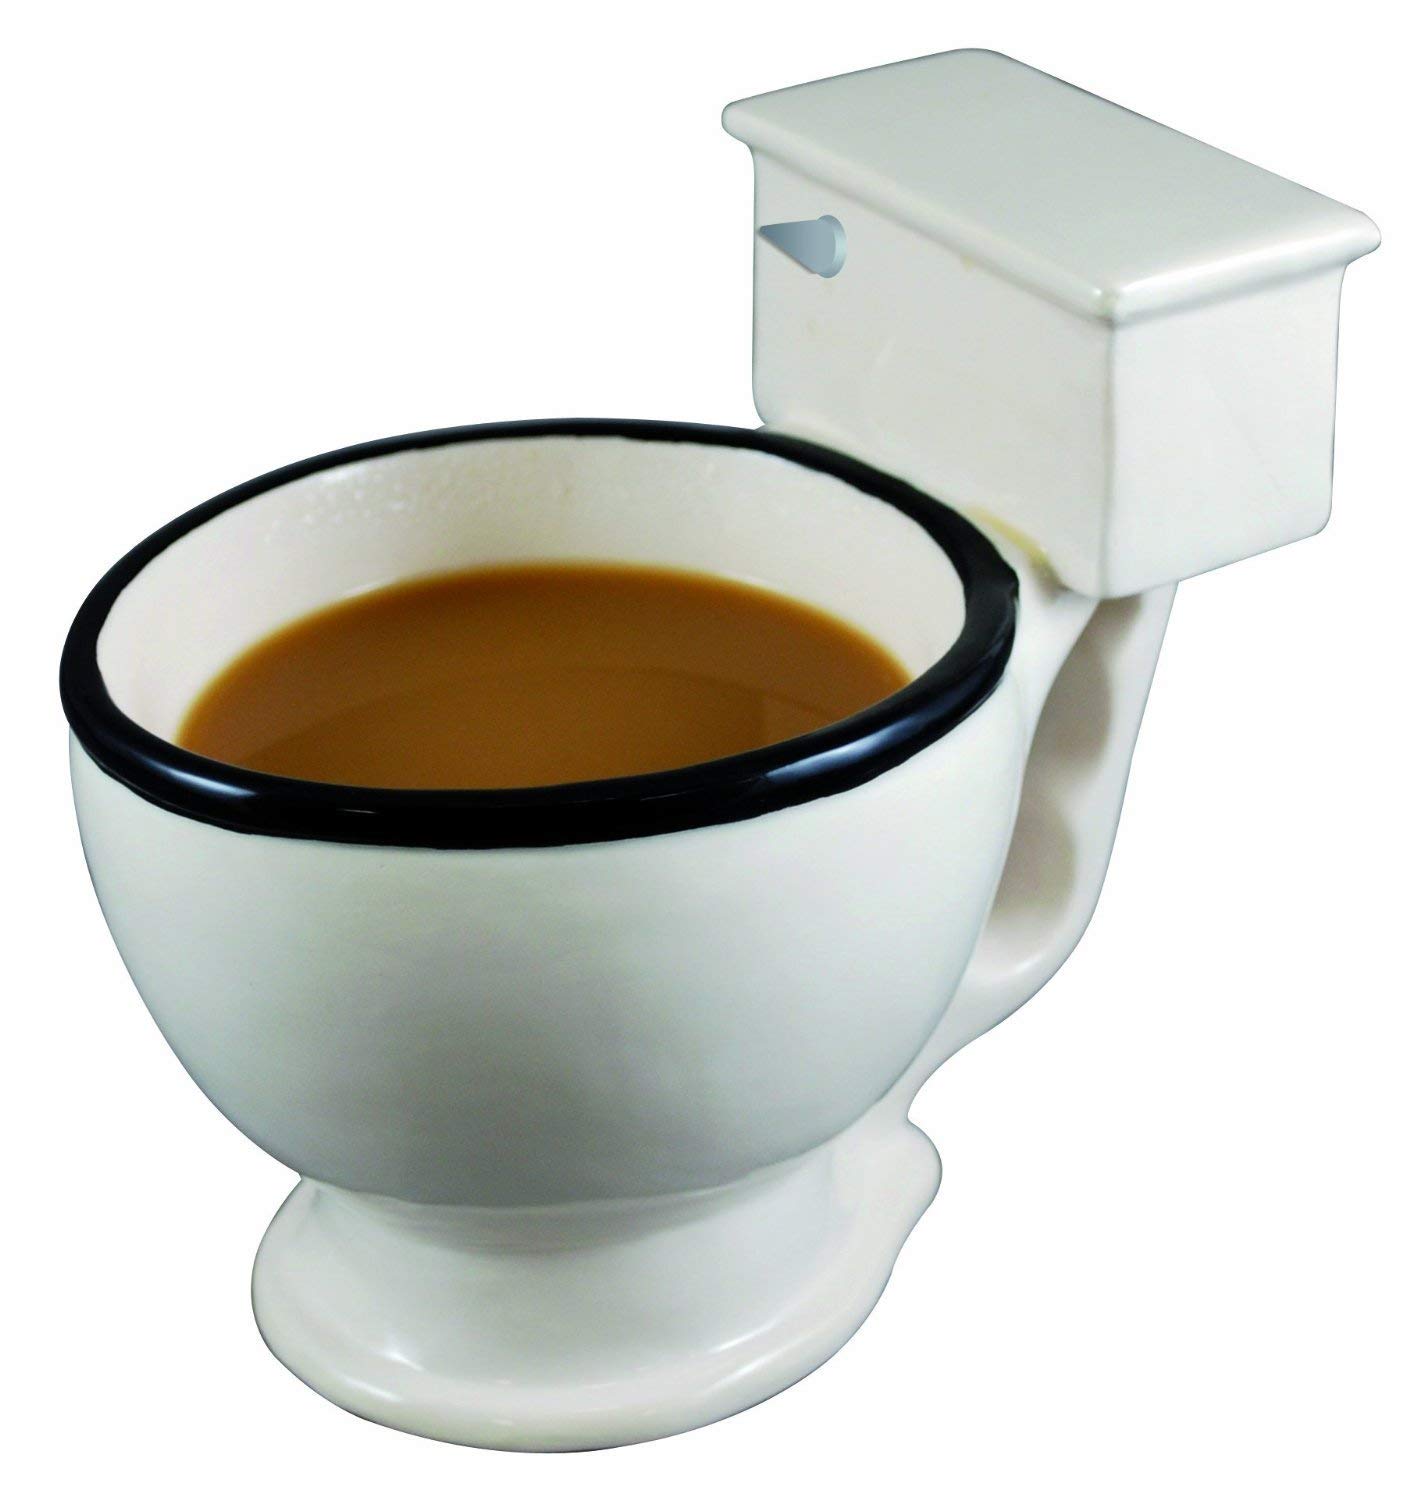 This toilet coffe mug is a great way to start your day and a perfect gift for someone with a dirty sense of humor.  <br/><br/> You can pick this up at  <a href="https://amzn.to/2LzyvK6" target="_blank">Amazon for about $12.99</a>.